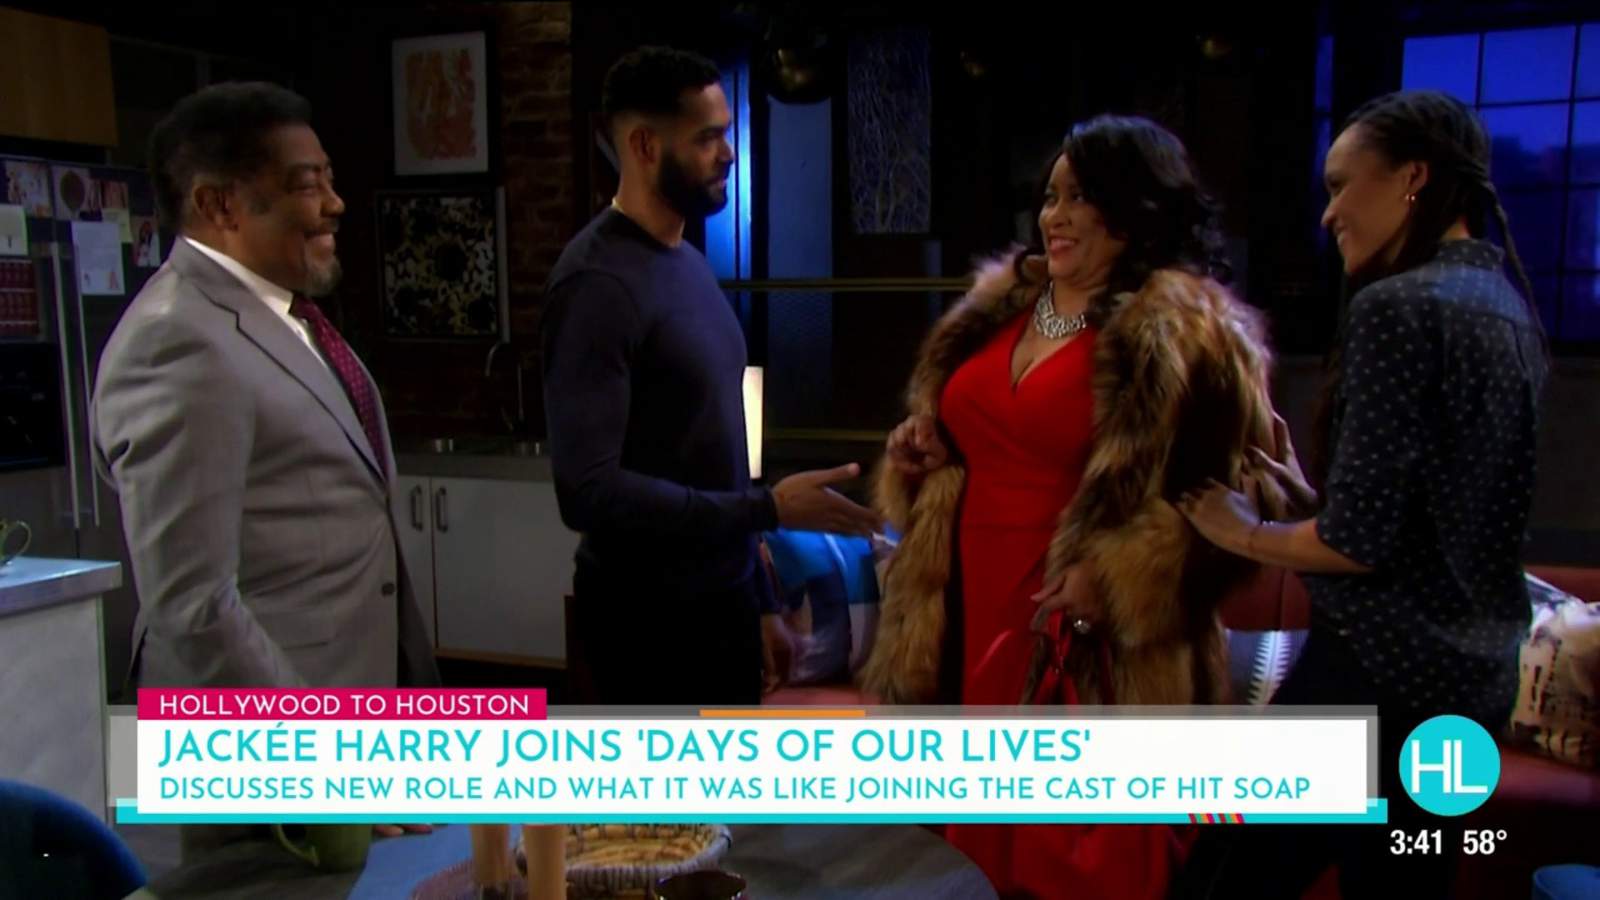 Actress Jackée Harry joins the cast of ‘Days Of Our Lives’ as exciting new character Paulina Price